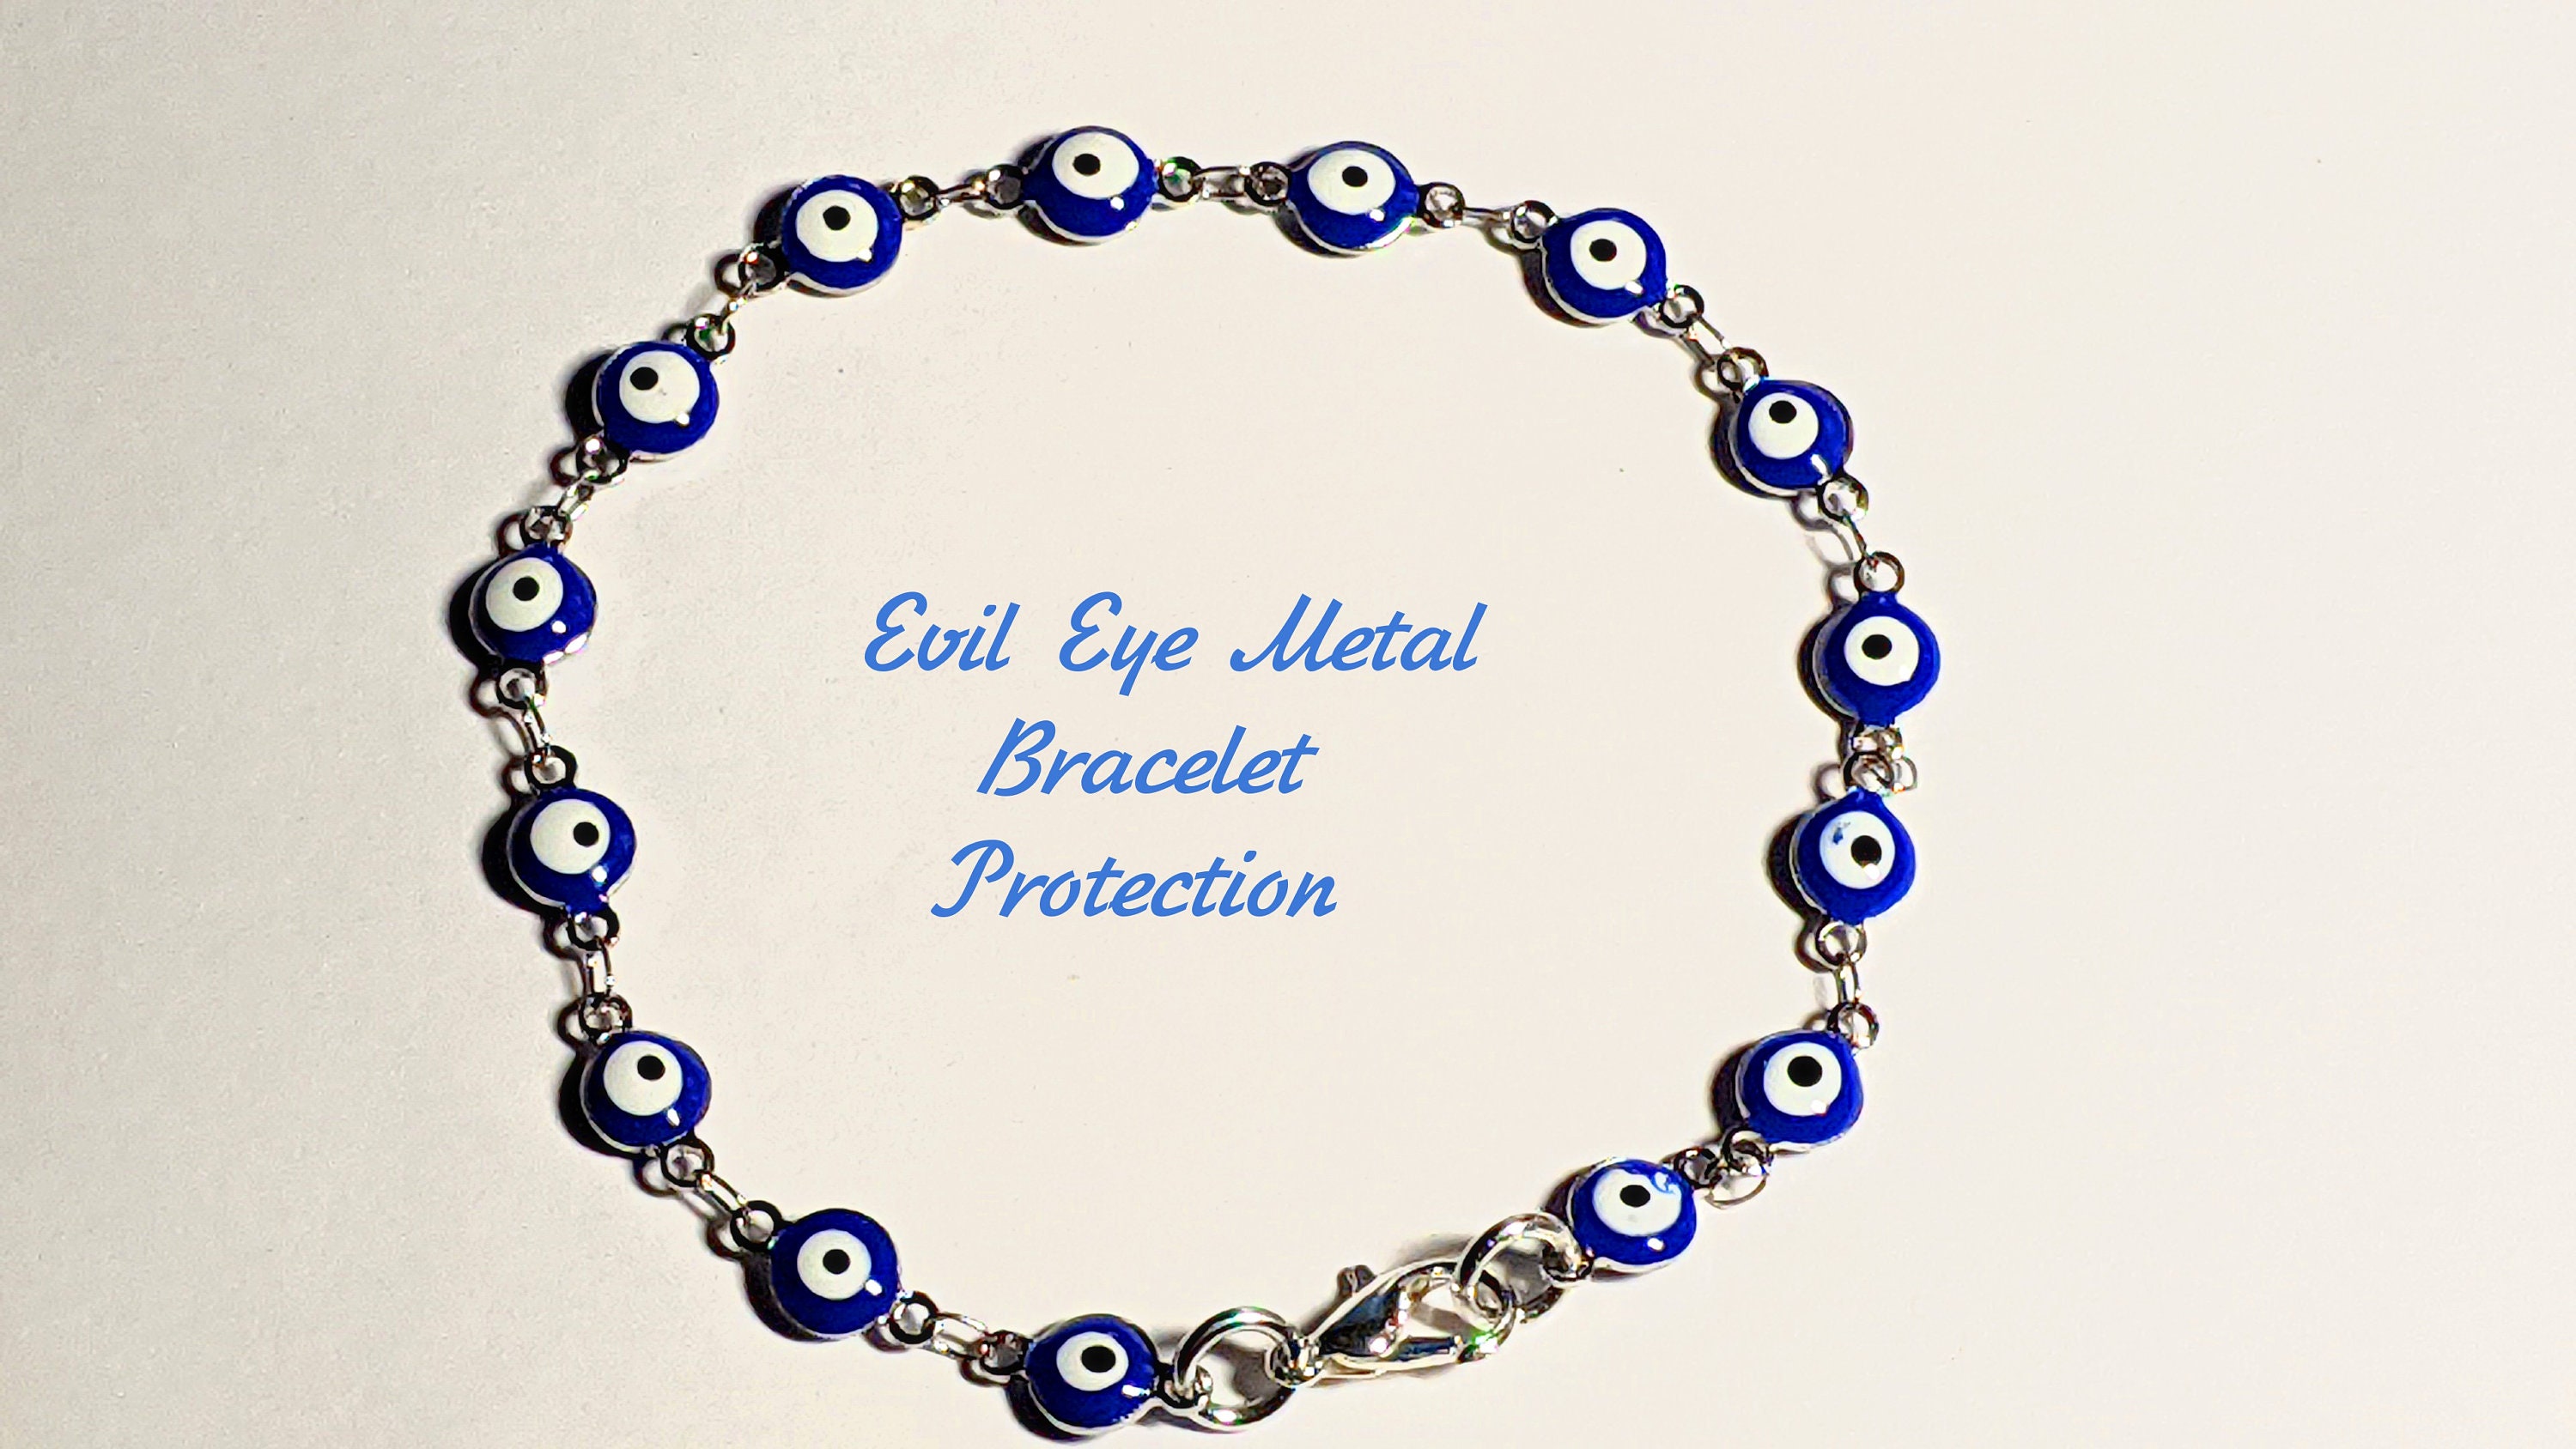 Evil Eye Bracelet 7 1/2 inches Crystal Rhinestone Spacer Beads Bling 4 Colors U Pick Nazar Amulet Talisman Protection Gift Teen Christmas